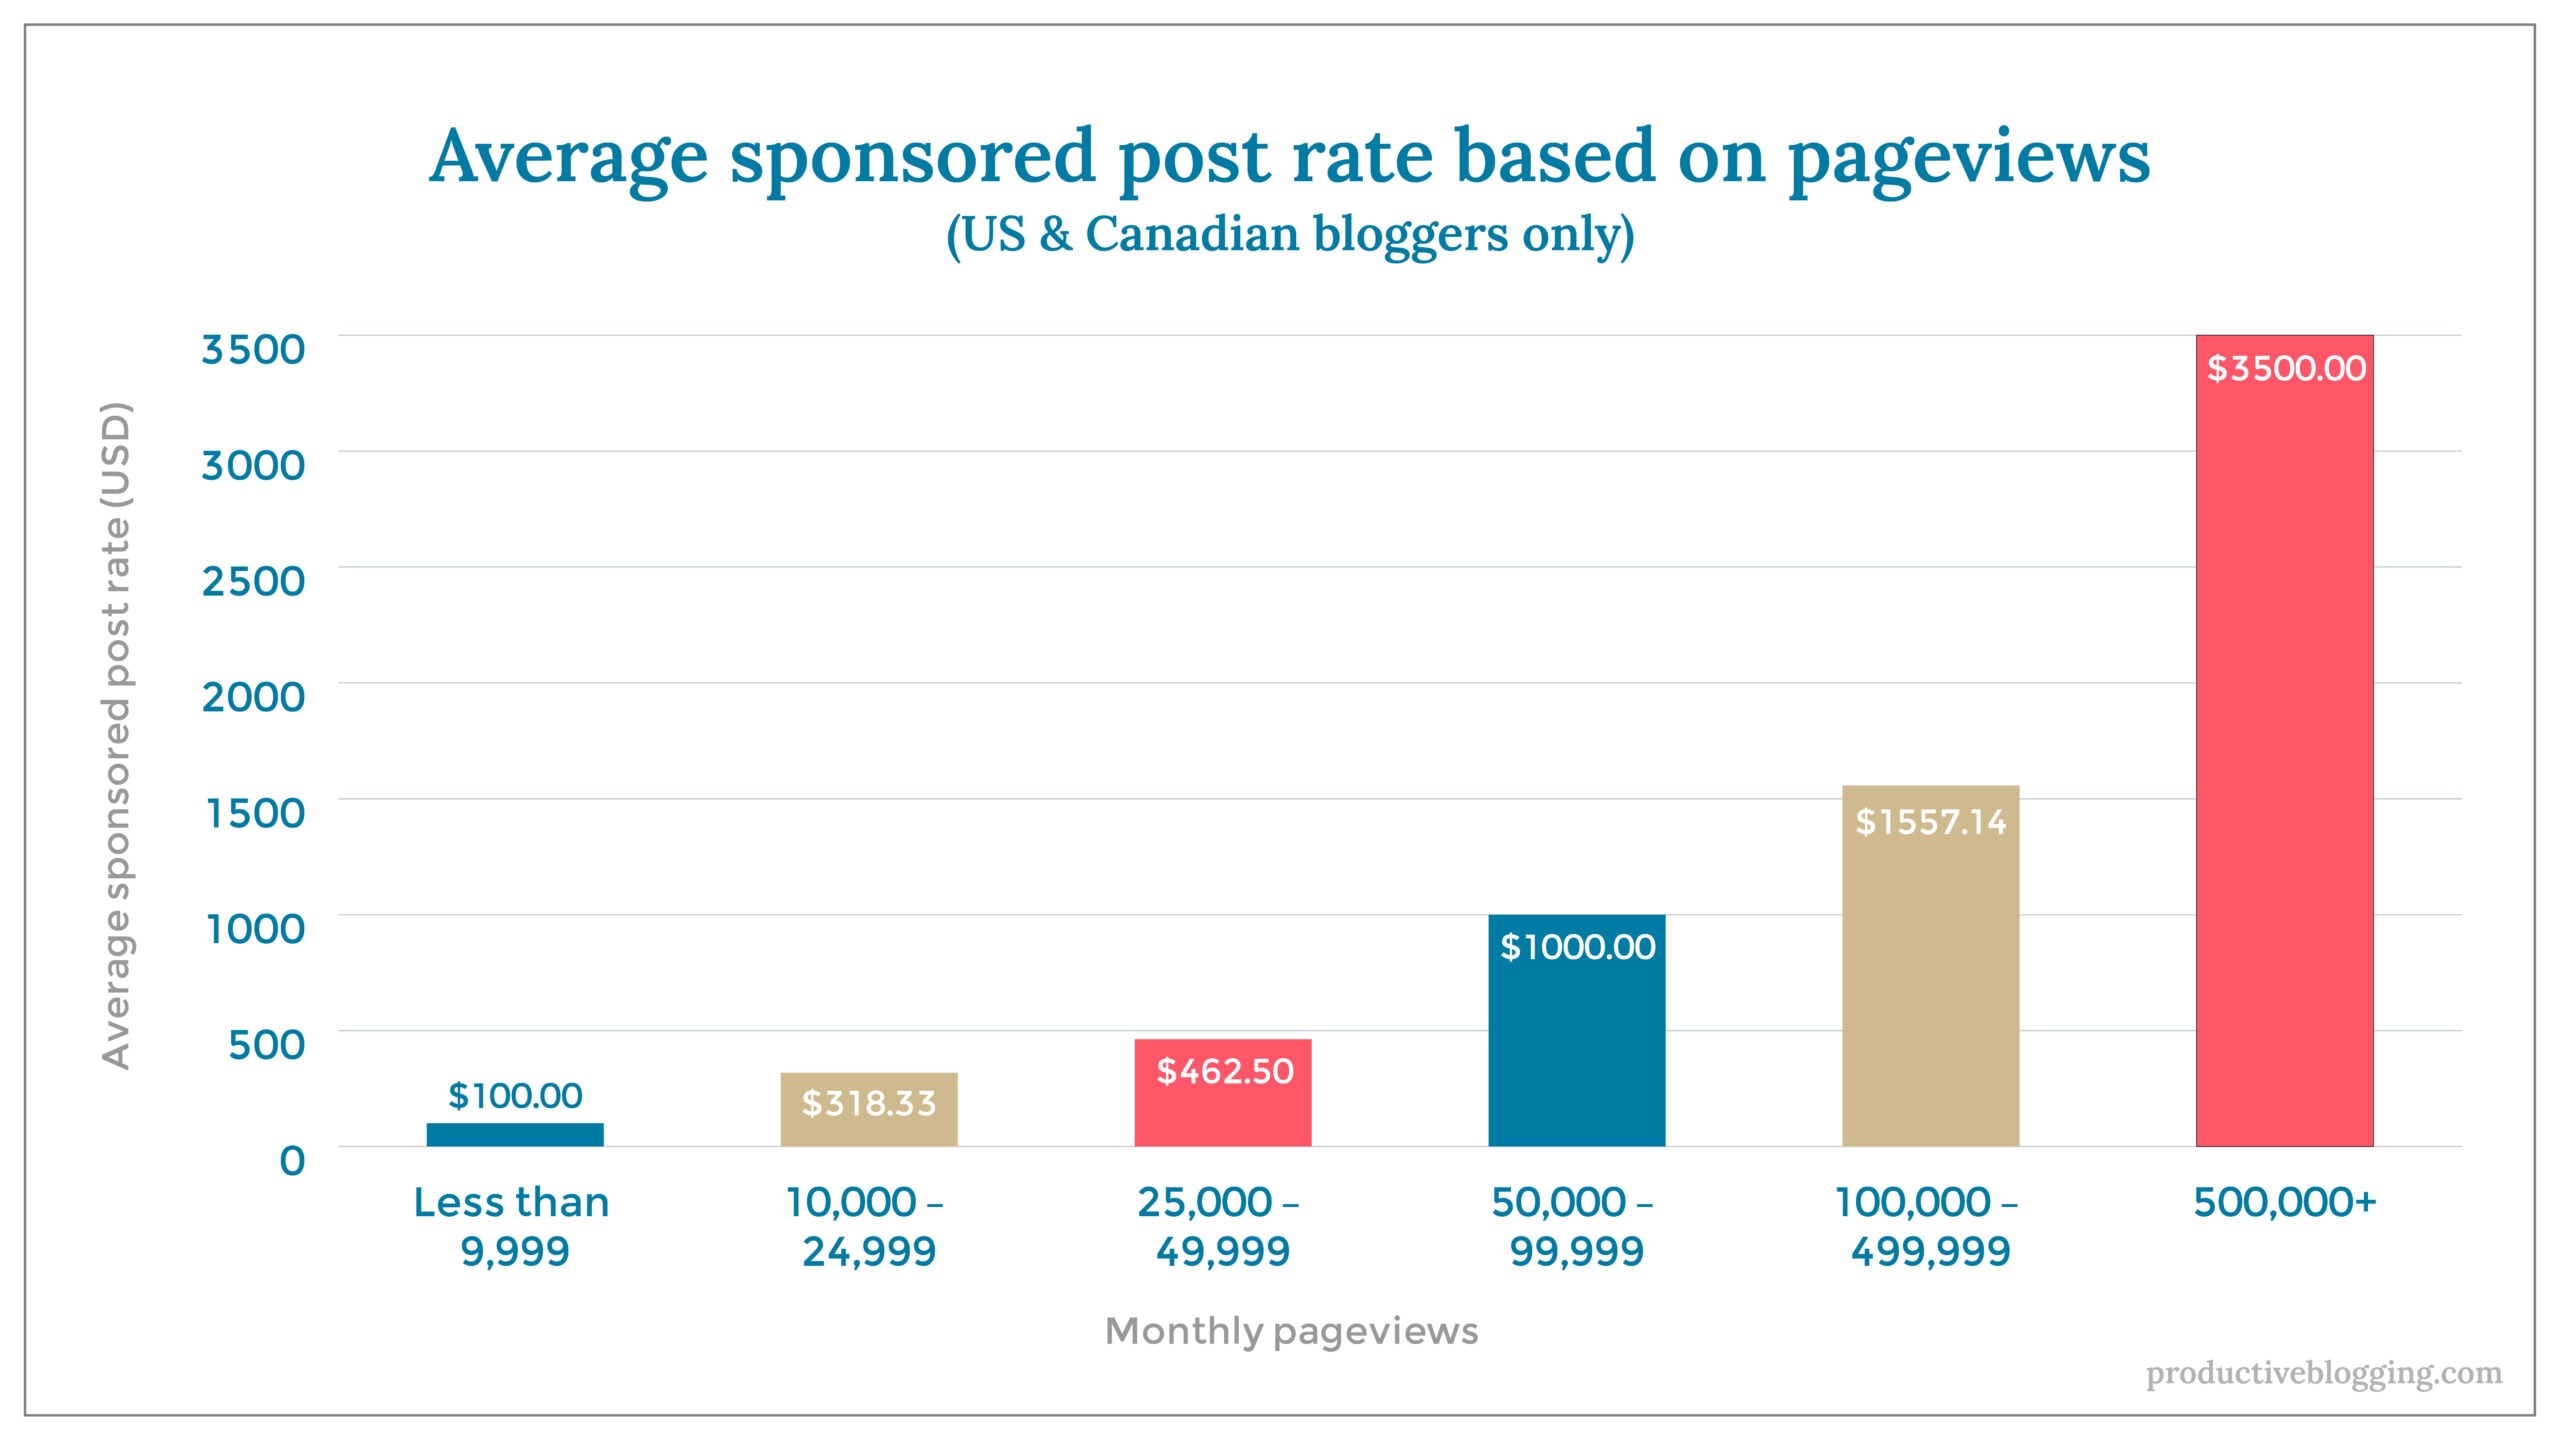 Average sponsored post rate based on pageviews (US & Canadian bloggers only)X axis: Monthly pageviewsY axis: Average sponsored post rate (USD)Less than 9,999		$100.00	10,000 – 24,999		$318.3325,000 – 49,999		$462.5050,000 – 99,999		$1000.00100,000 – 499,999	$1557.14500,000+		$3500.00